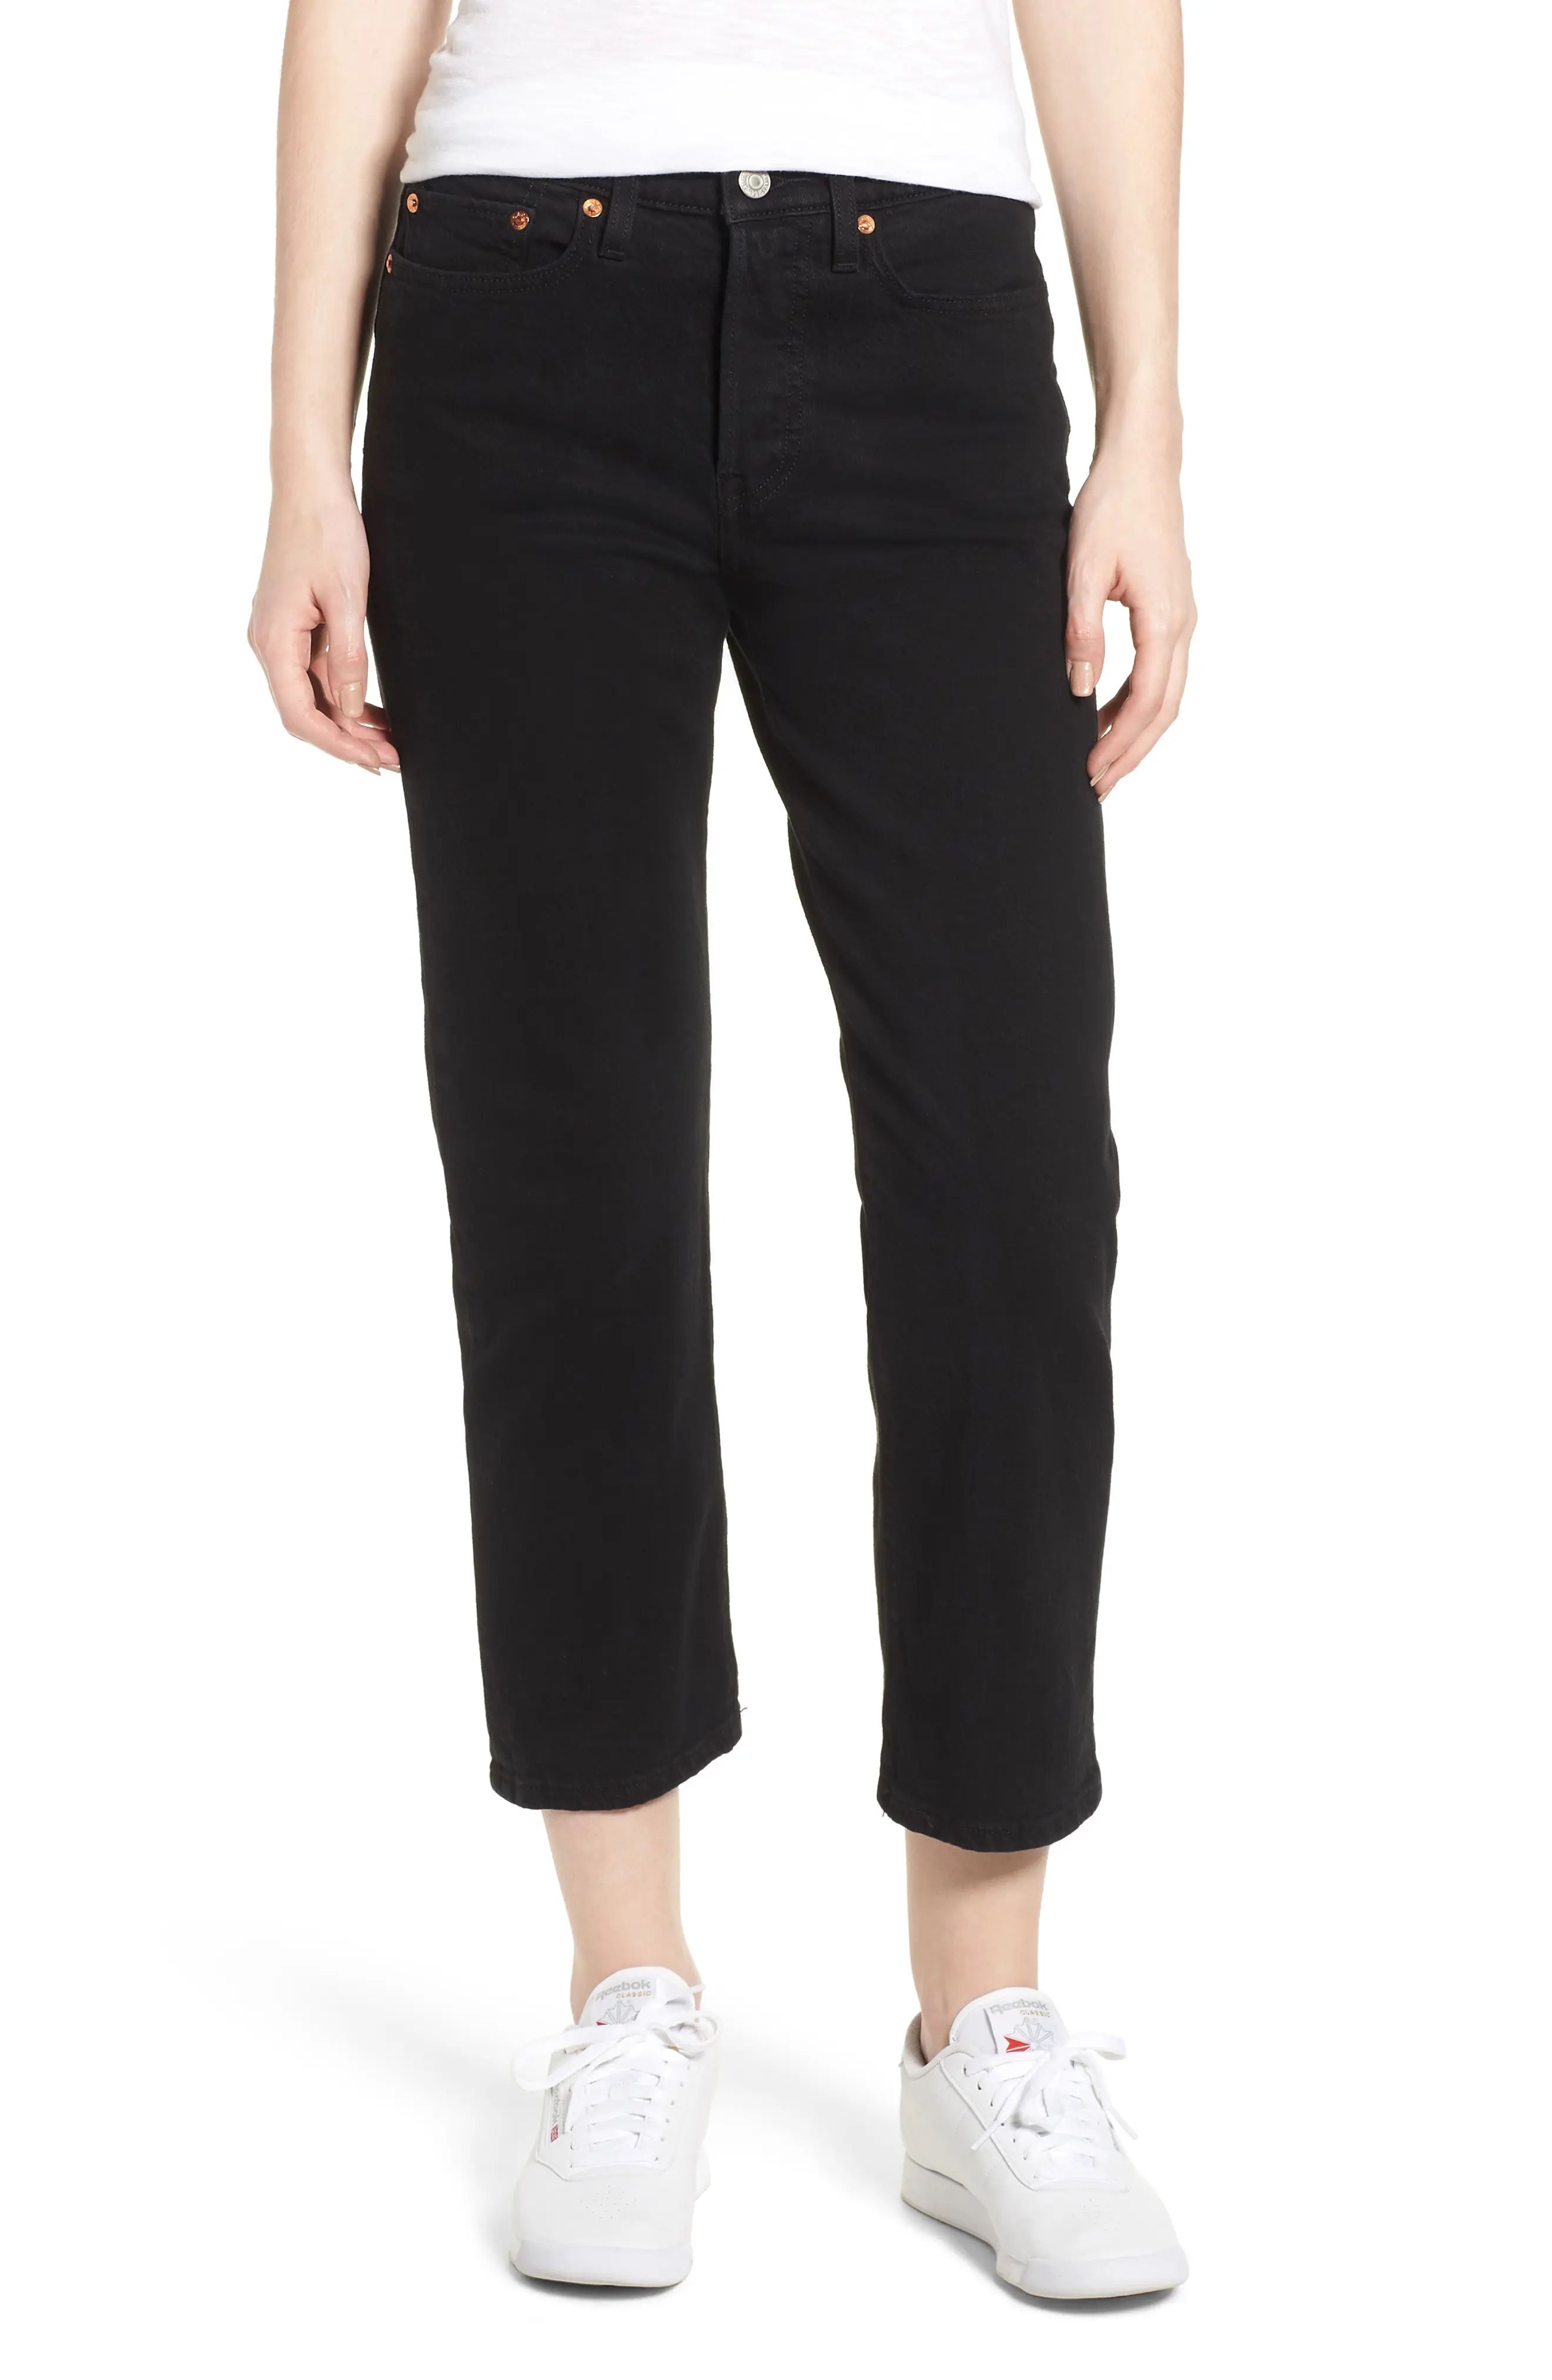 levi's Wedgie High Waist Straight Jeans, Size 29 X 28 in Black Heart at Nordstrom | Nordstrom